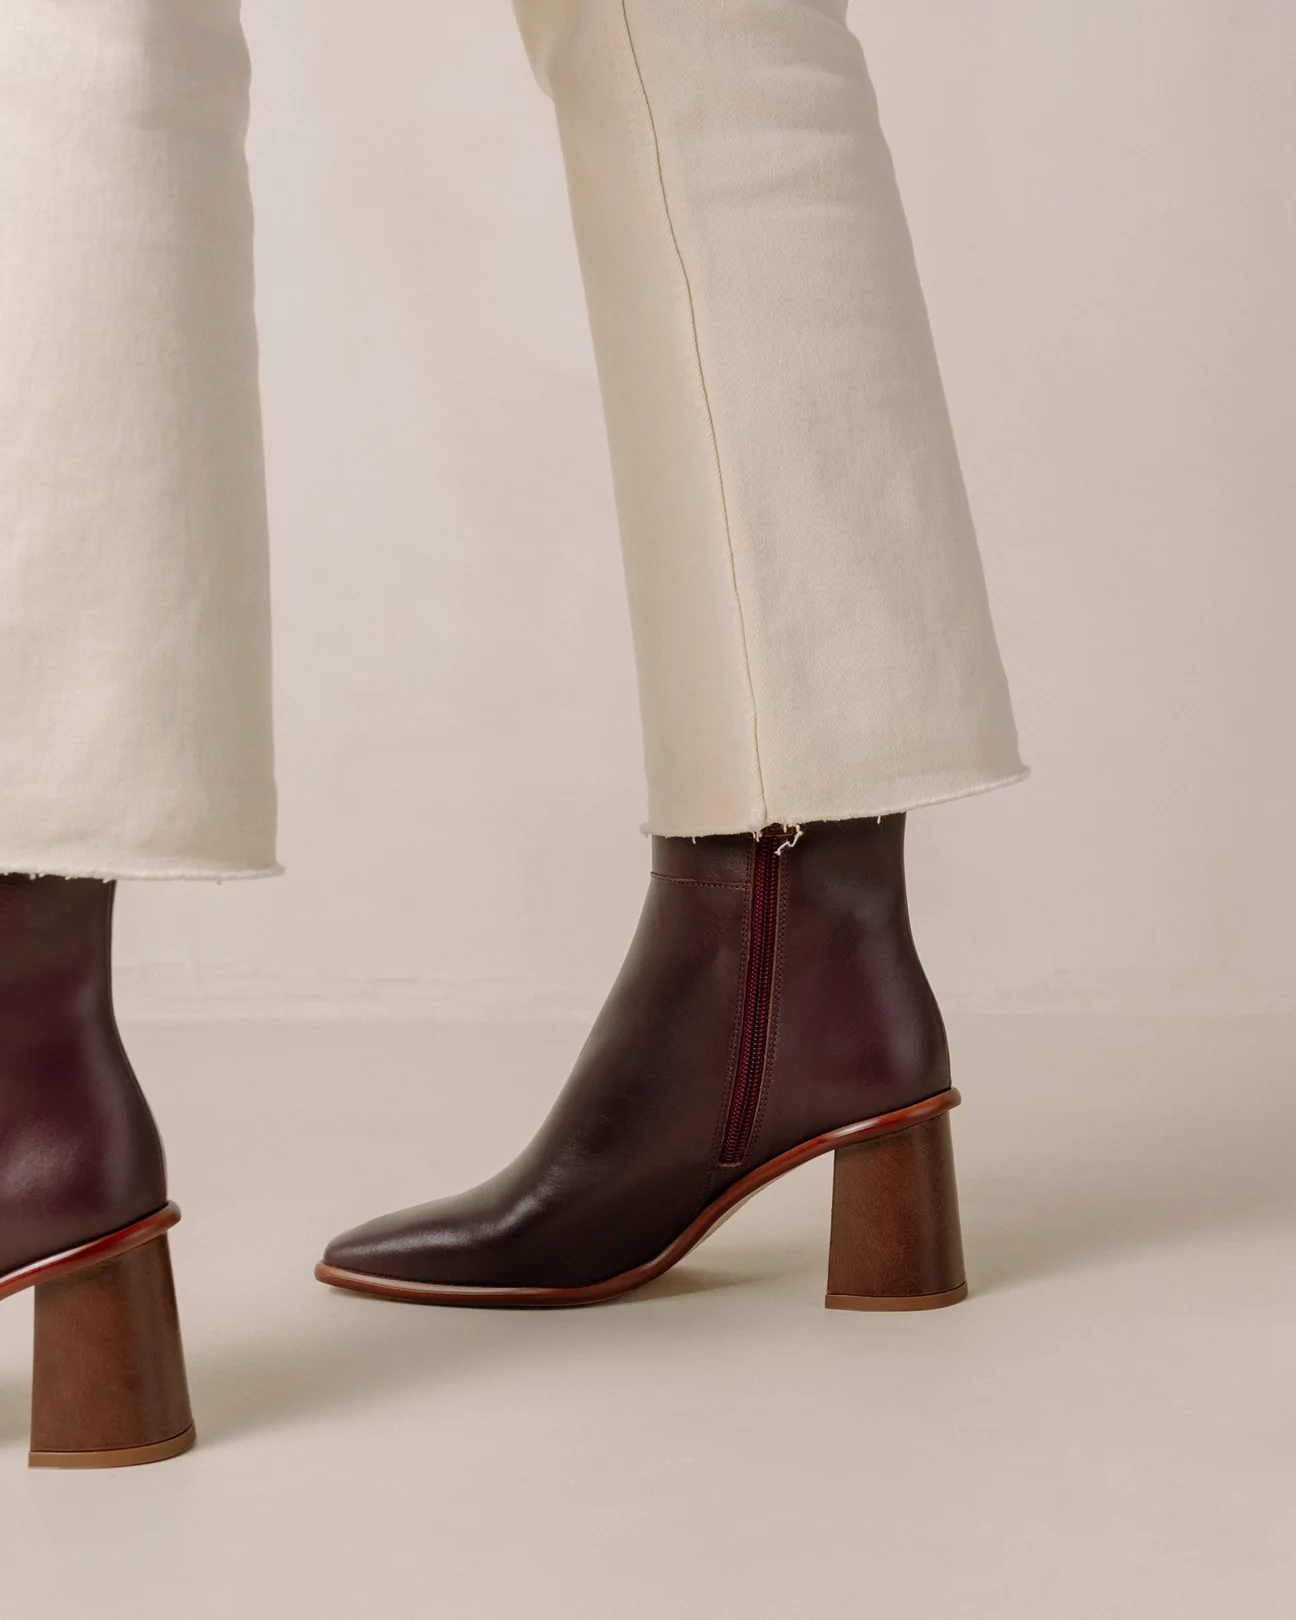 Brown ankle boots for both men and women